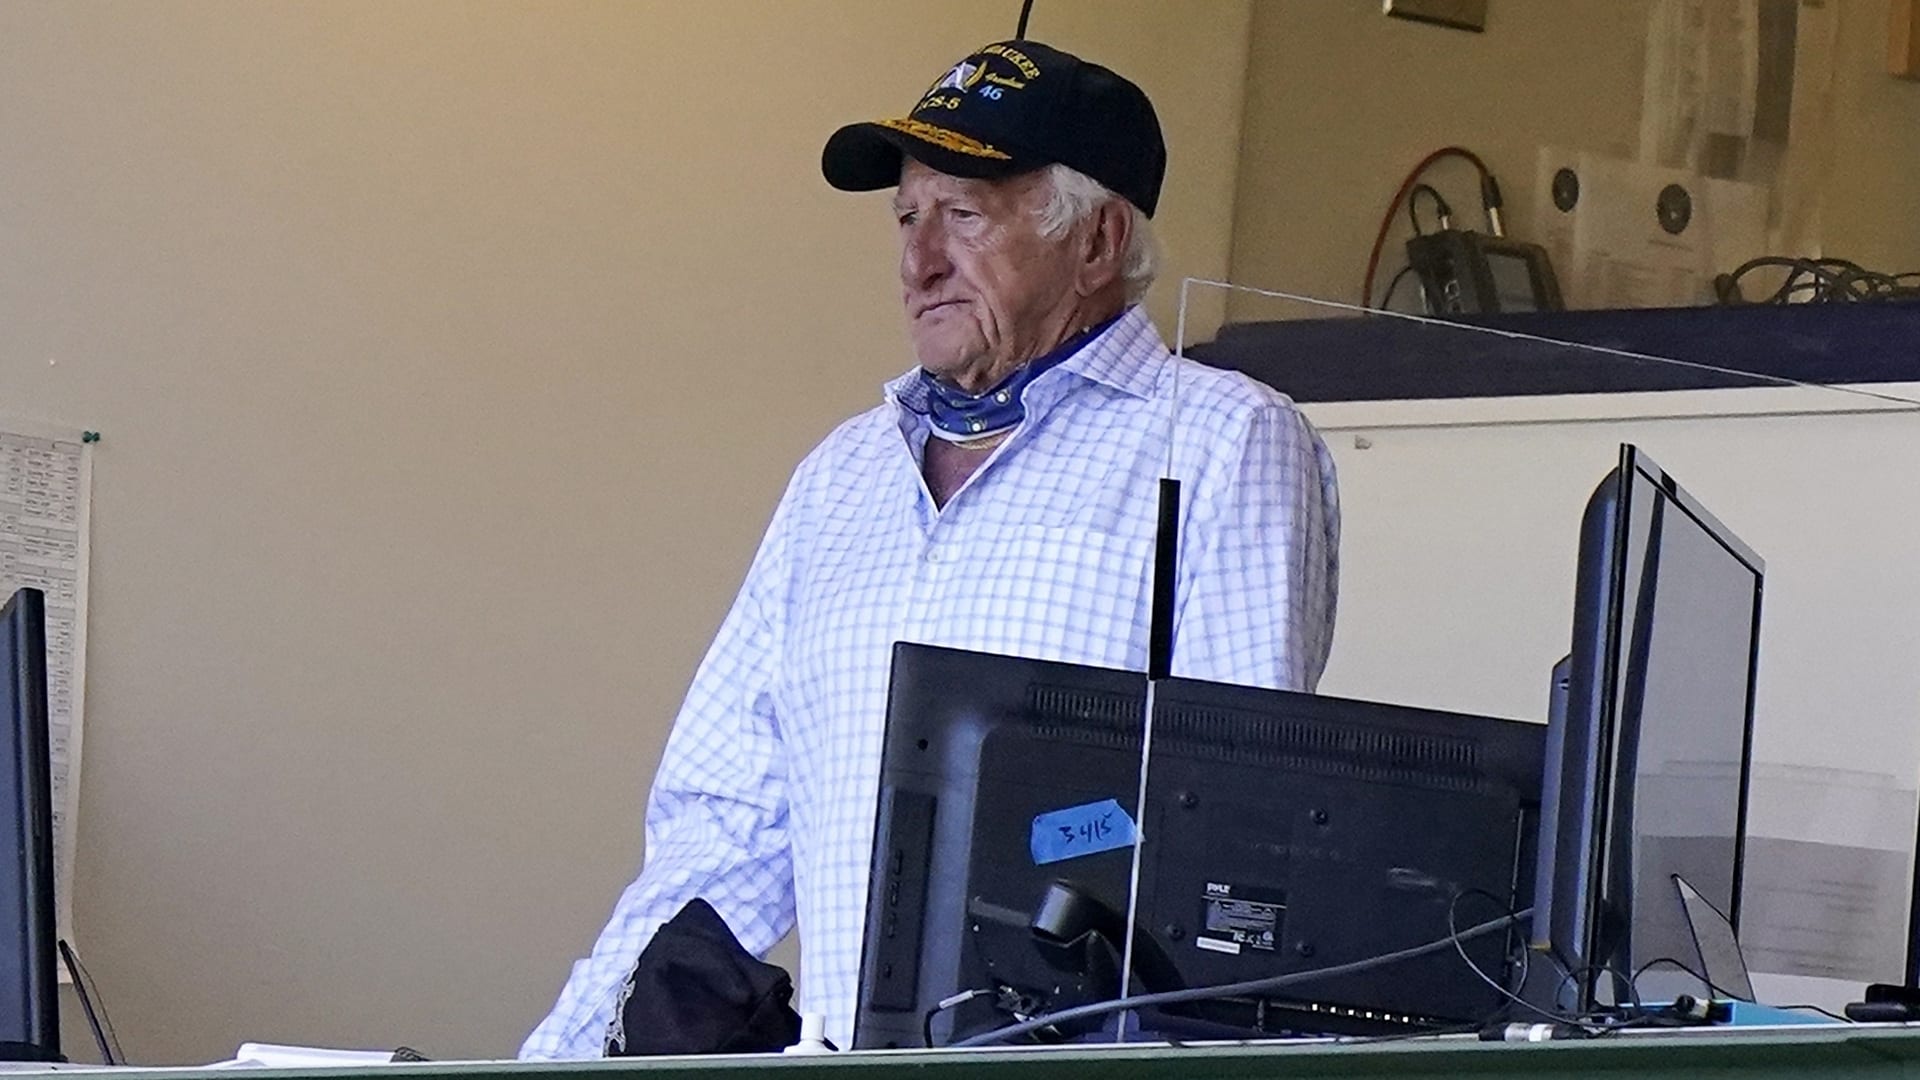 Bob Uecker is a mainstay on Brewers broadcasts